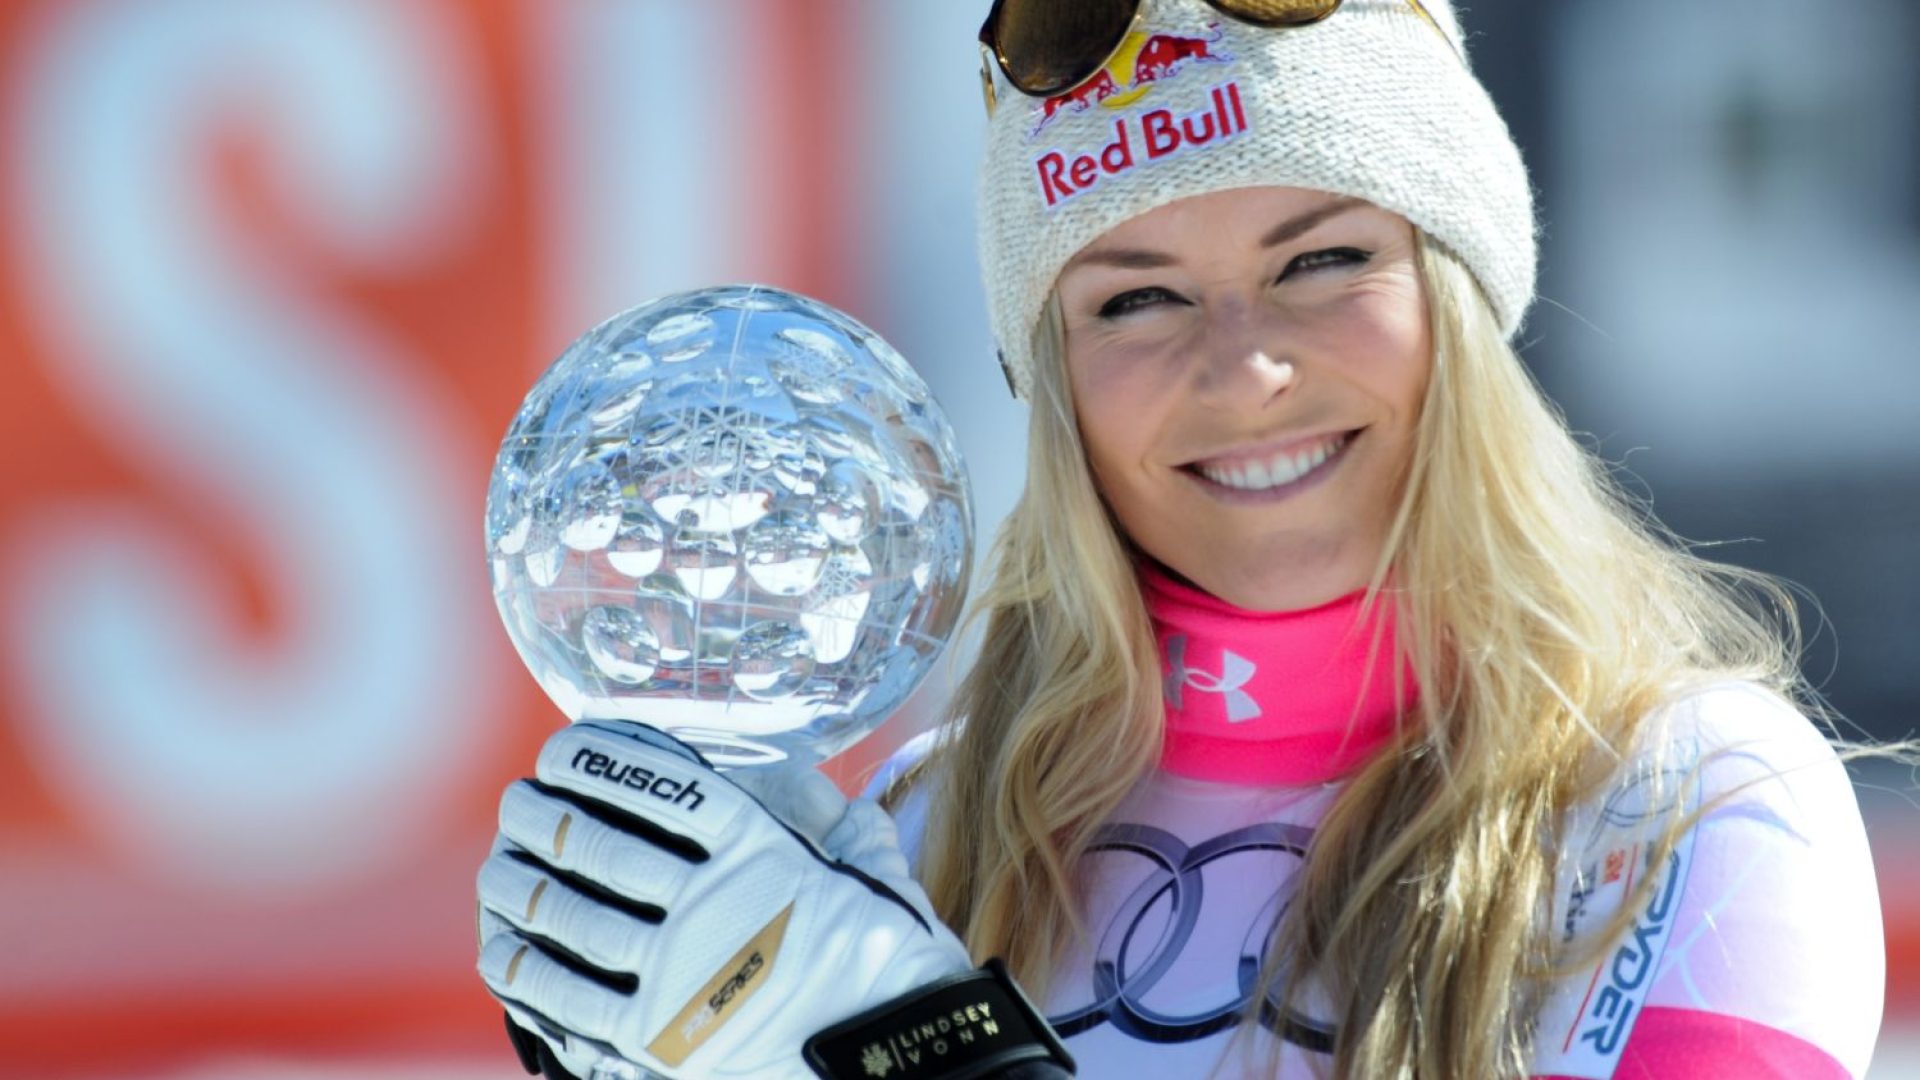 lindsey-wins-7th-world-cup-downhill-title-2